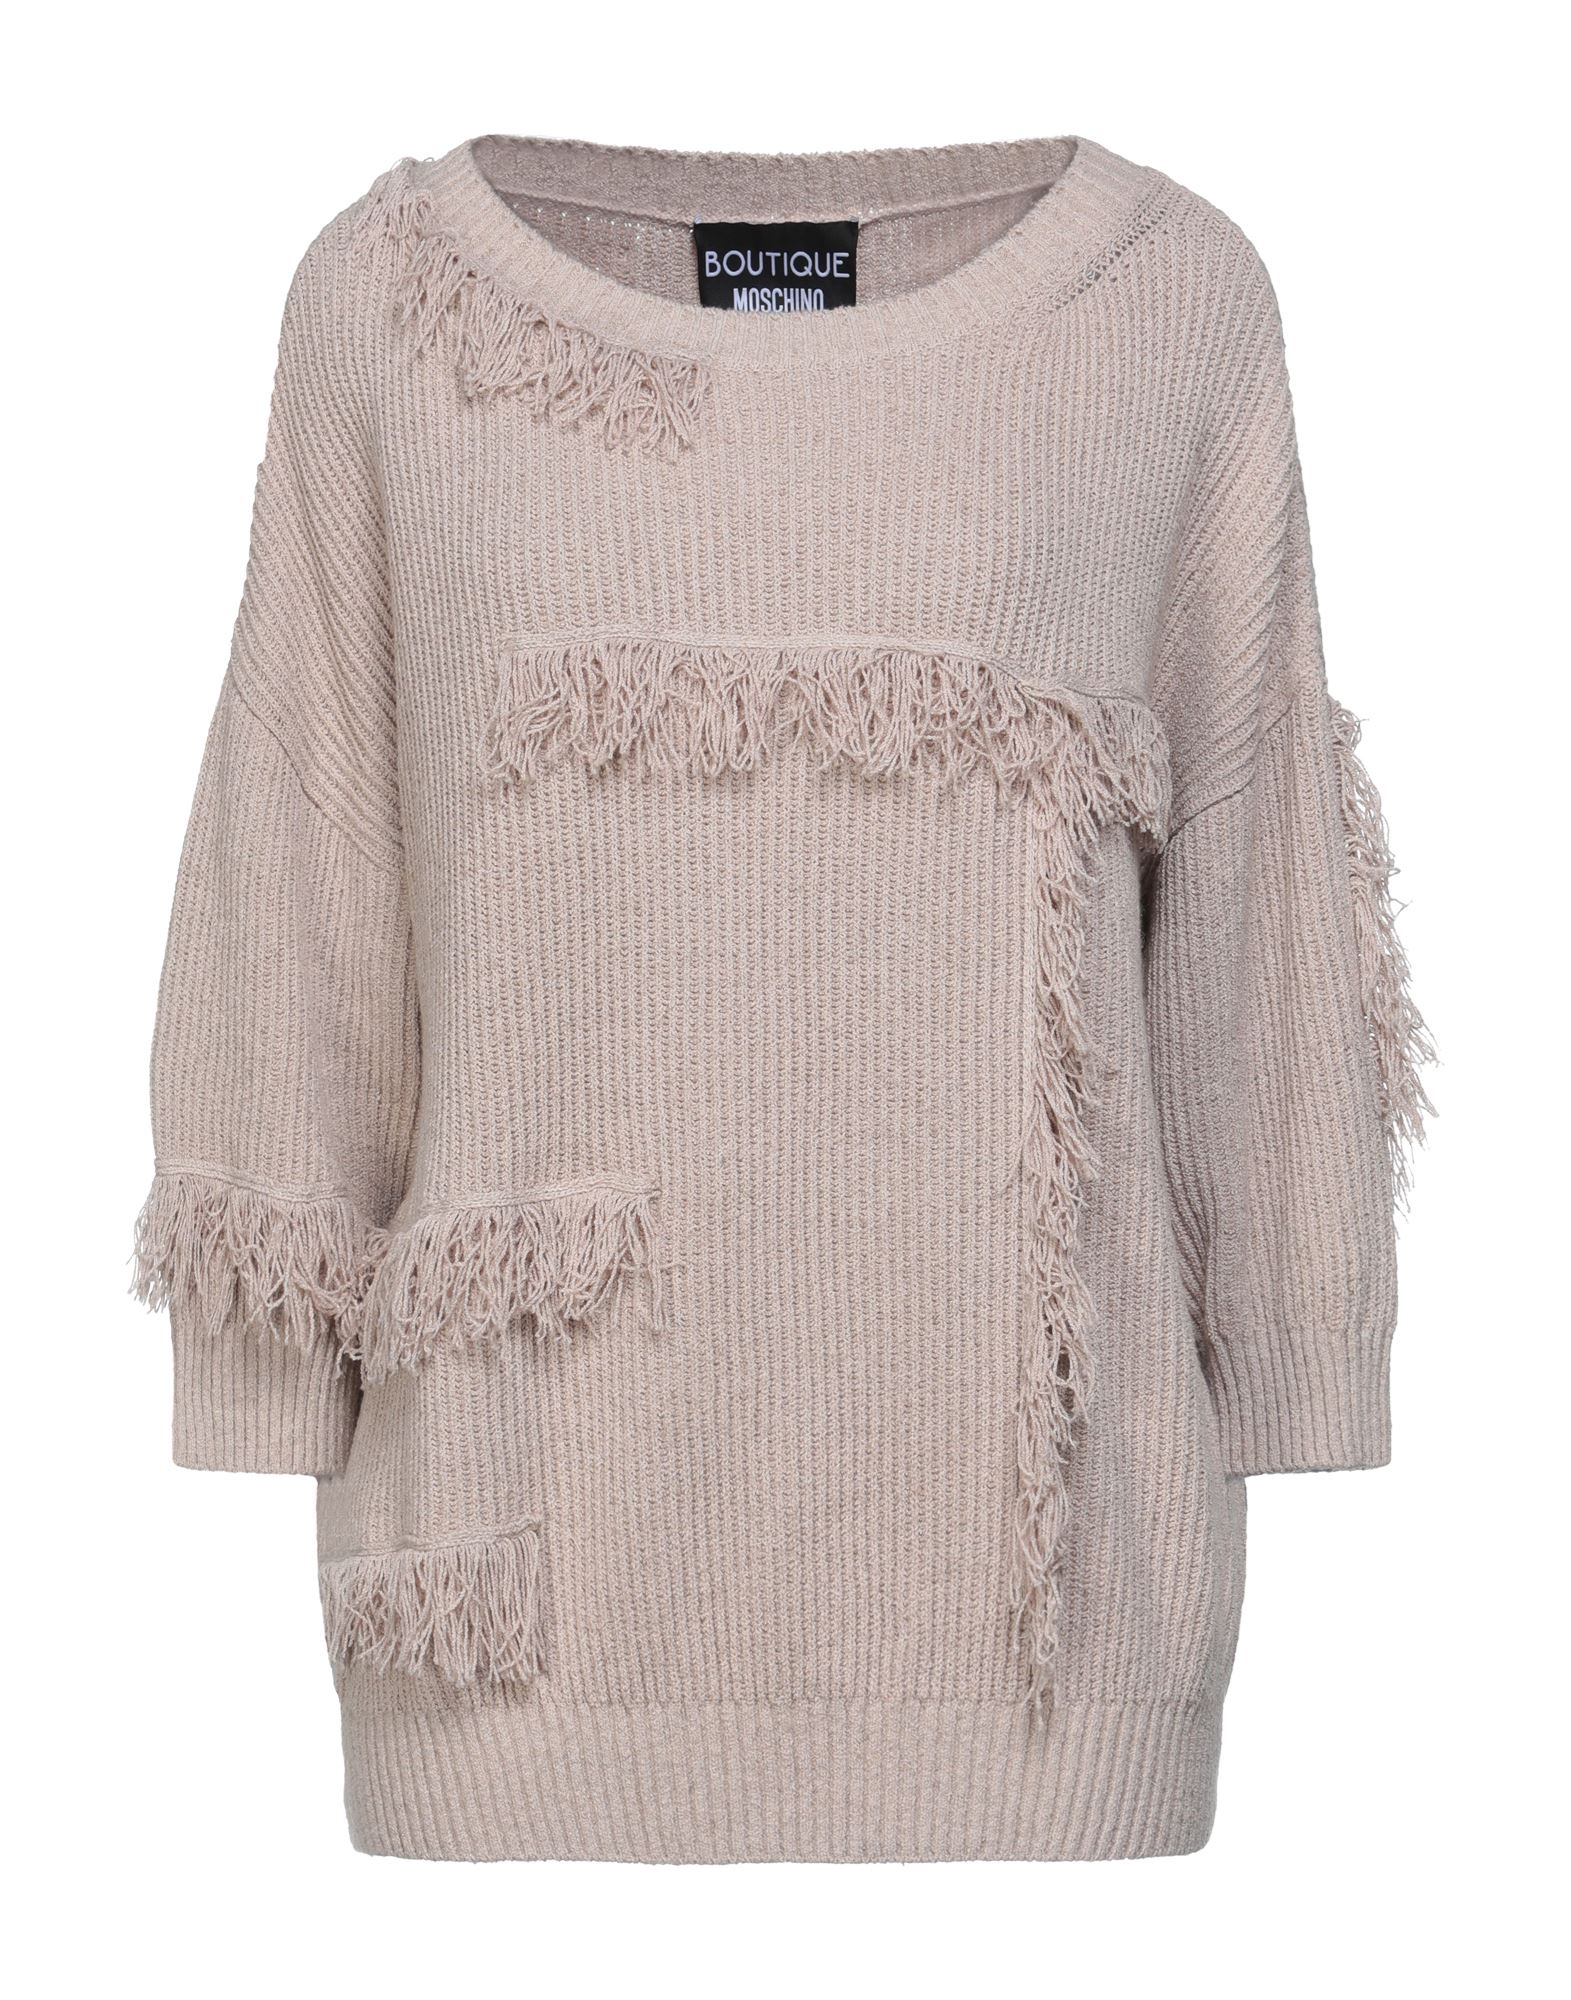 Boutique Moschino Sweaters In Light Brown